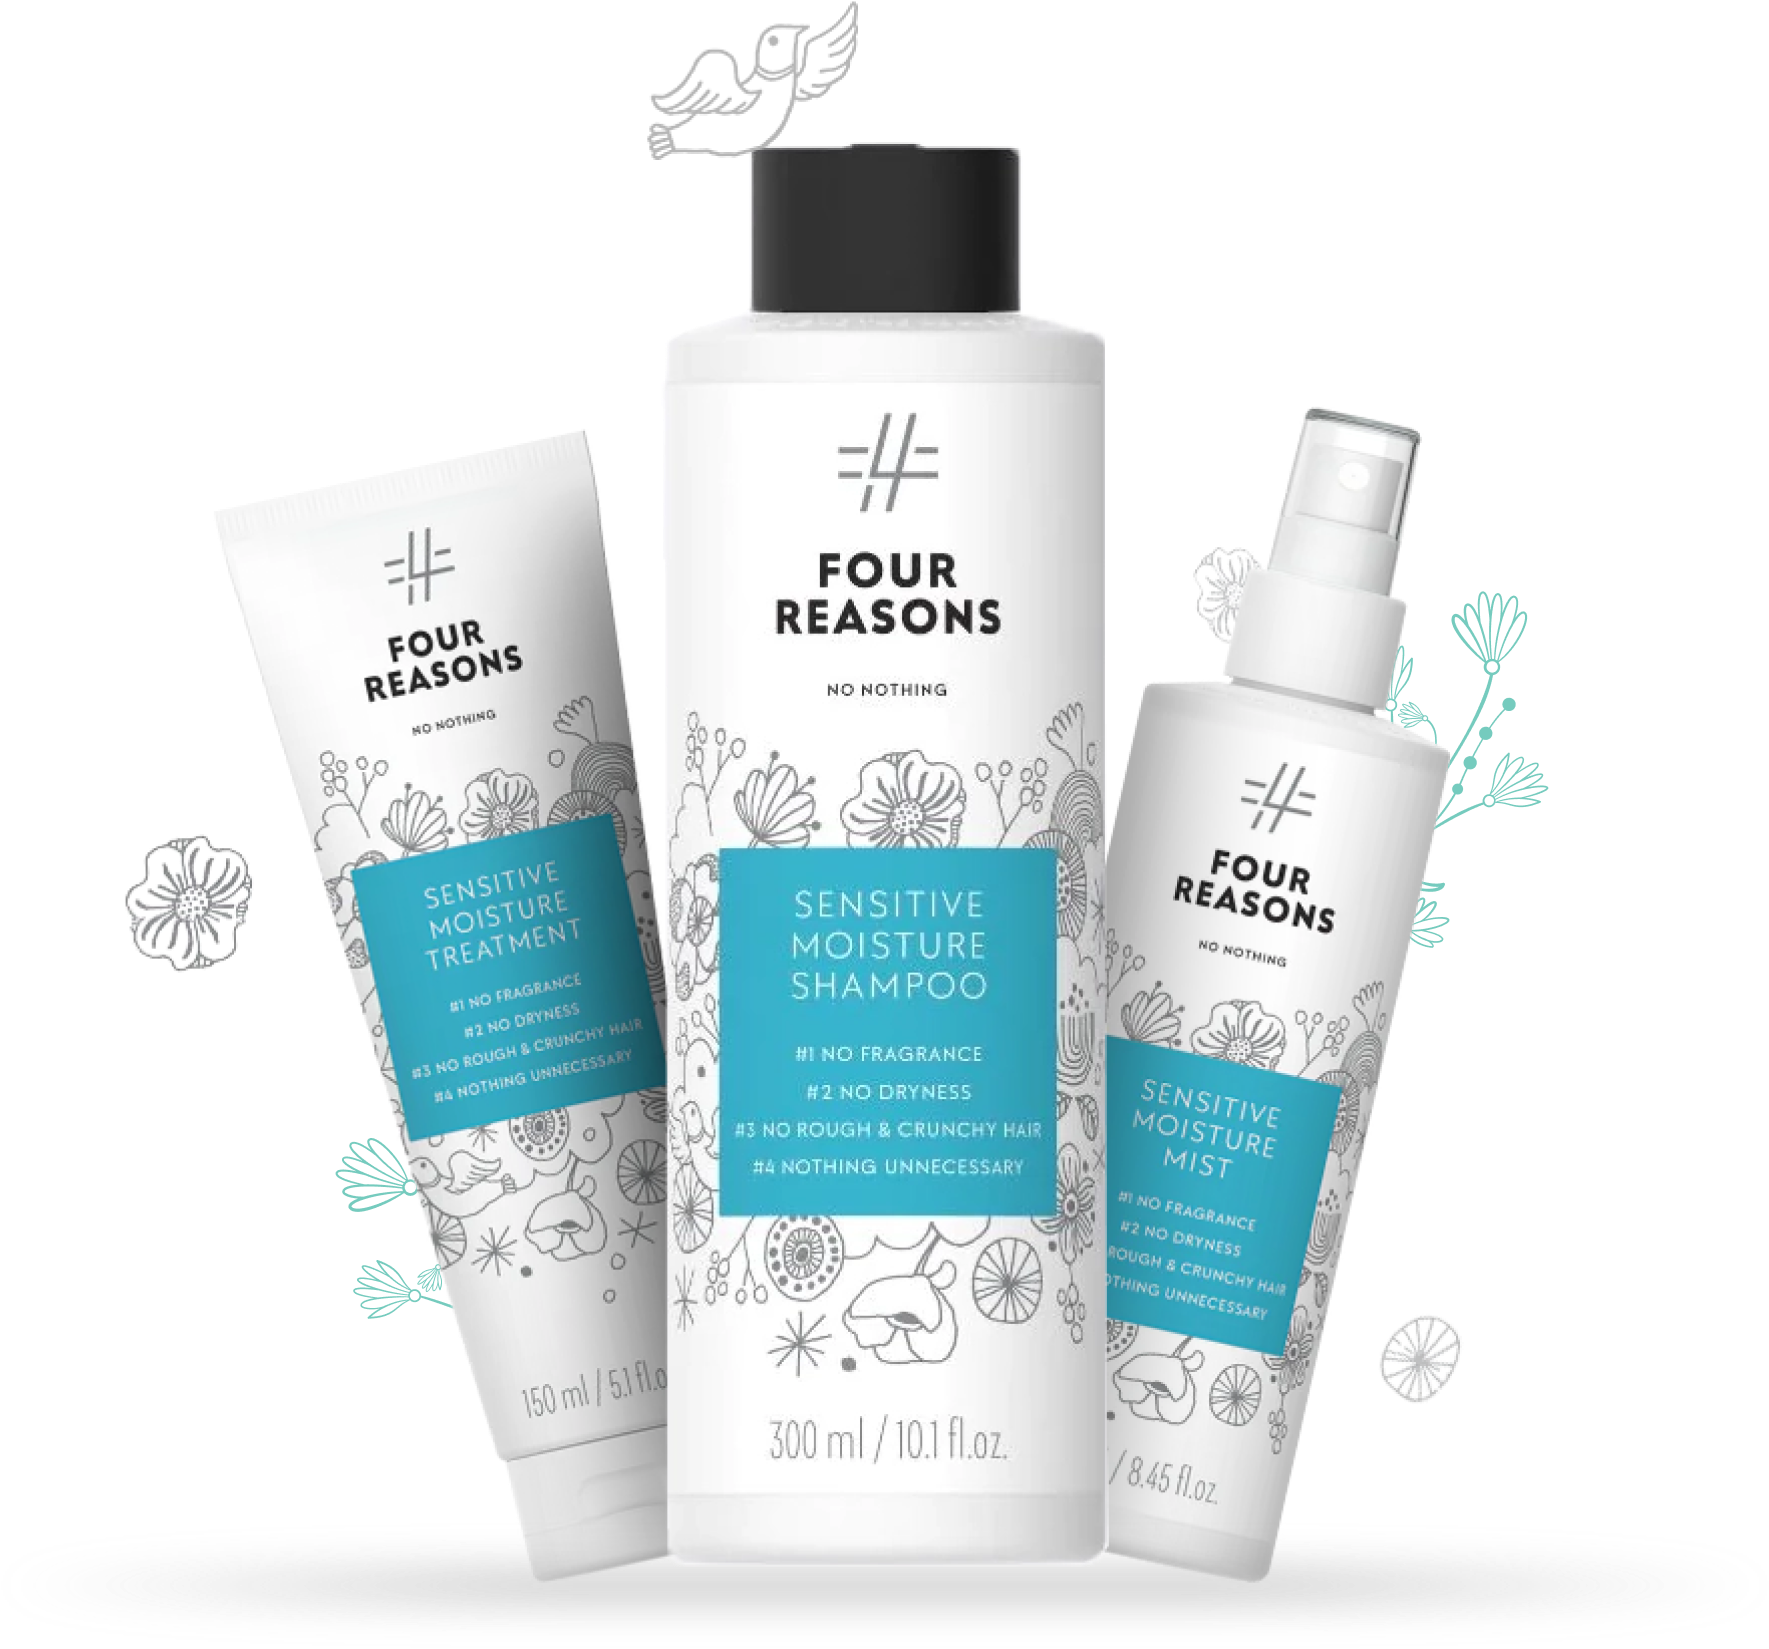 Get Your Non-Toxic Gift Set Now!